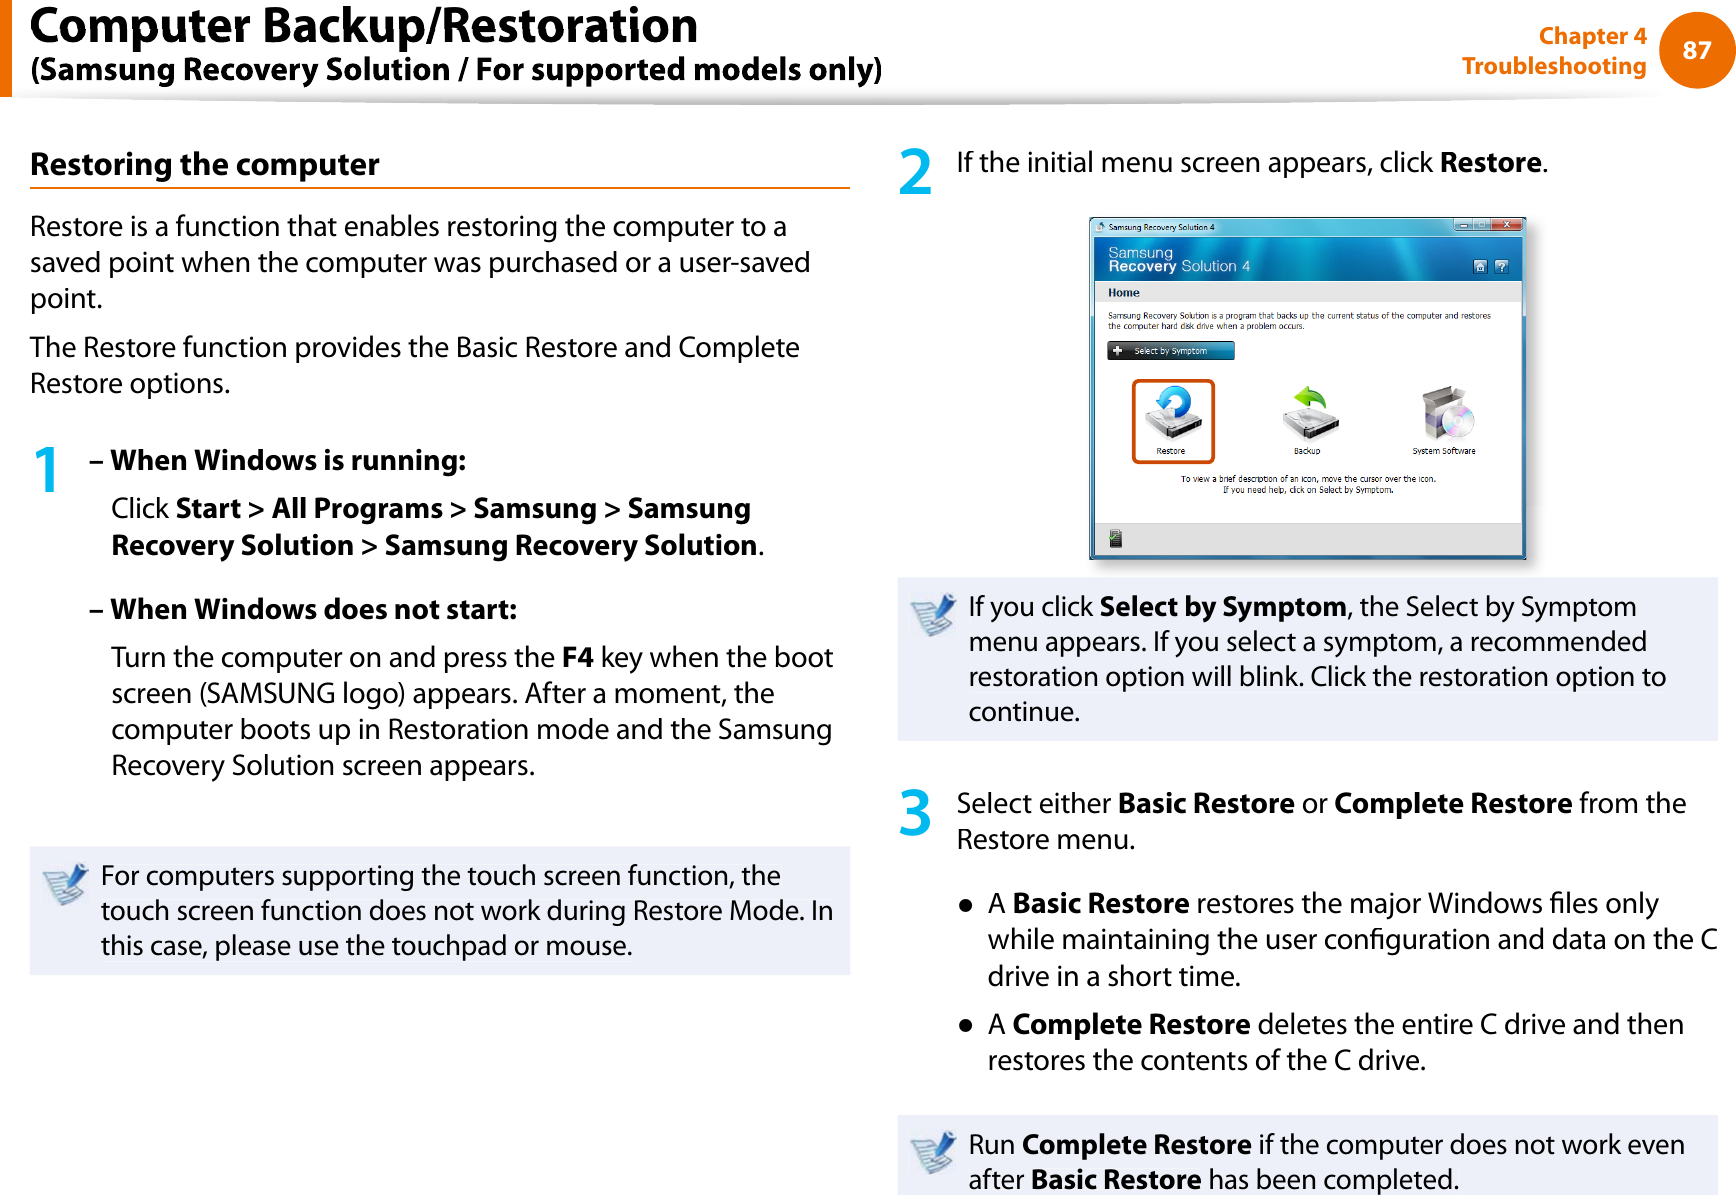 87Chapter 4TroubleshootingRestoring the computerRestore is a function that enables restoring the computer to asaved point when the computer was purchased or a user-savedpoint.The Restore function provides the Basic Restore and CompleteRestore options.1– When Windows is running:Click Start &gt; All Programs &gt; Samsung &gt; SamsungRecovery Solution &gt; Samsung Recovery Solution.– When Windows does not start:Turn the computer on and press theF4 key when the bootscreen (SAMSUNG logo) appears. After a moment, thecomputer boots up in Restoration mode and the SamsungRecovery Solution screen appears.For computers supporting the touch screen function, thetouch screen function does not work during Restore Mode. Inthis case, please use the touchpad or mouse.2If the initial menu screen appears, click Restore.If you click Select by Symptom, the Select by Symptommenu appears. If you select a symptom, a recommendedrestoration option will blink. Click the restoration option tocontinue.3Select either Basic Restore orComplete Restore from theRestore menu.ƔABasic Restore restores the major Windows les onlywhile maintaining the user conguration and data on the Cdrive in a short time.ƔAComplete Restore deletes the entire C drive and thenrestores the contents of the C drive.Run Complete Restore if the computer does not work evenafter Basic Restore has been completed.Computer Backup/Restoration